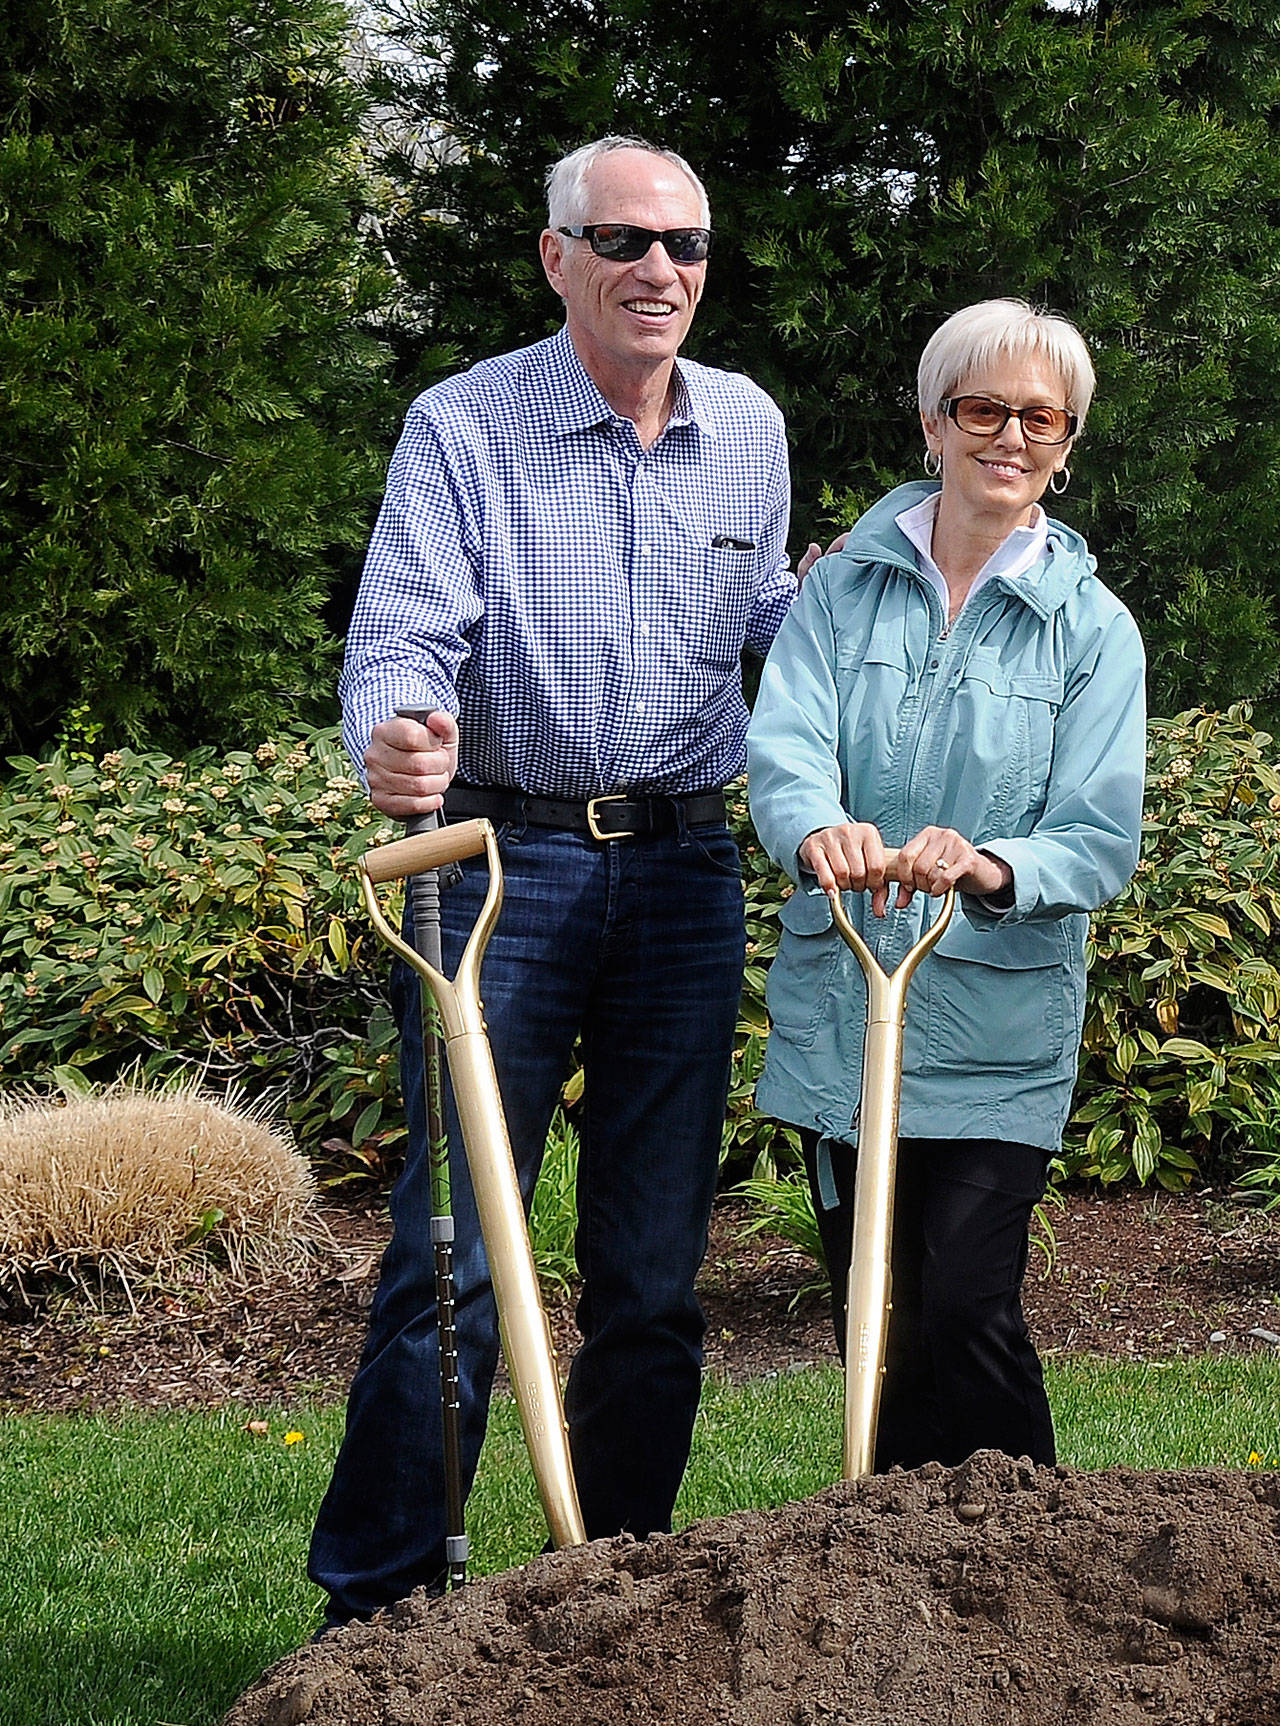 Bill and Esther Littlejohn are pictured at a groundbreaking ceremony at the Olympic Medical Cancer Center in April. The event honored major donors to a campaign that raised $1.2 million of the $4.4 million OMCC expansion. Bill Littlejohn, a longtime businessman and philanthropist, died Dec. 12. (Olympic Peninsula News Group file photo by Michael Dashiell)